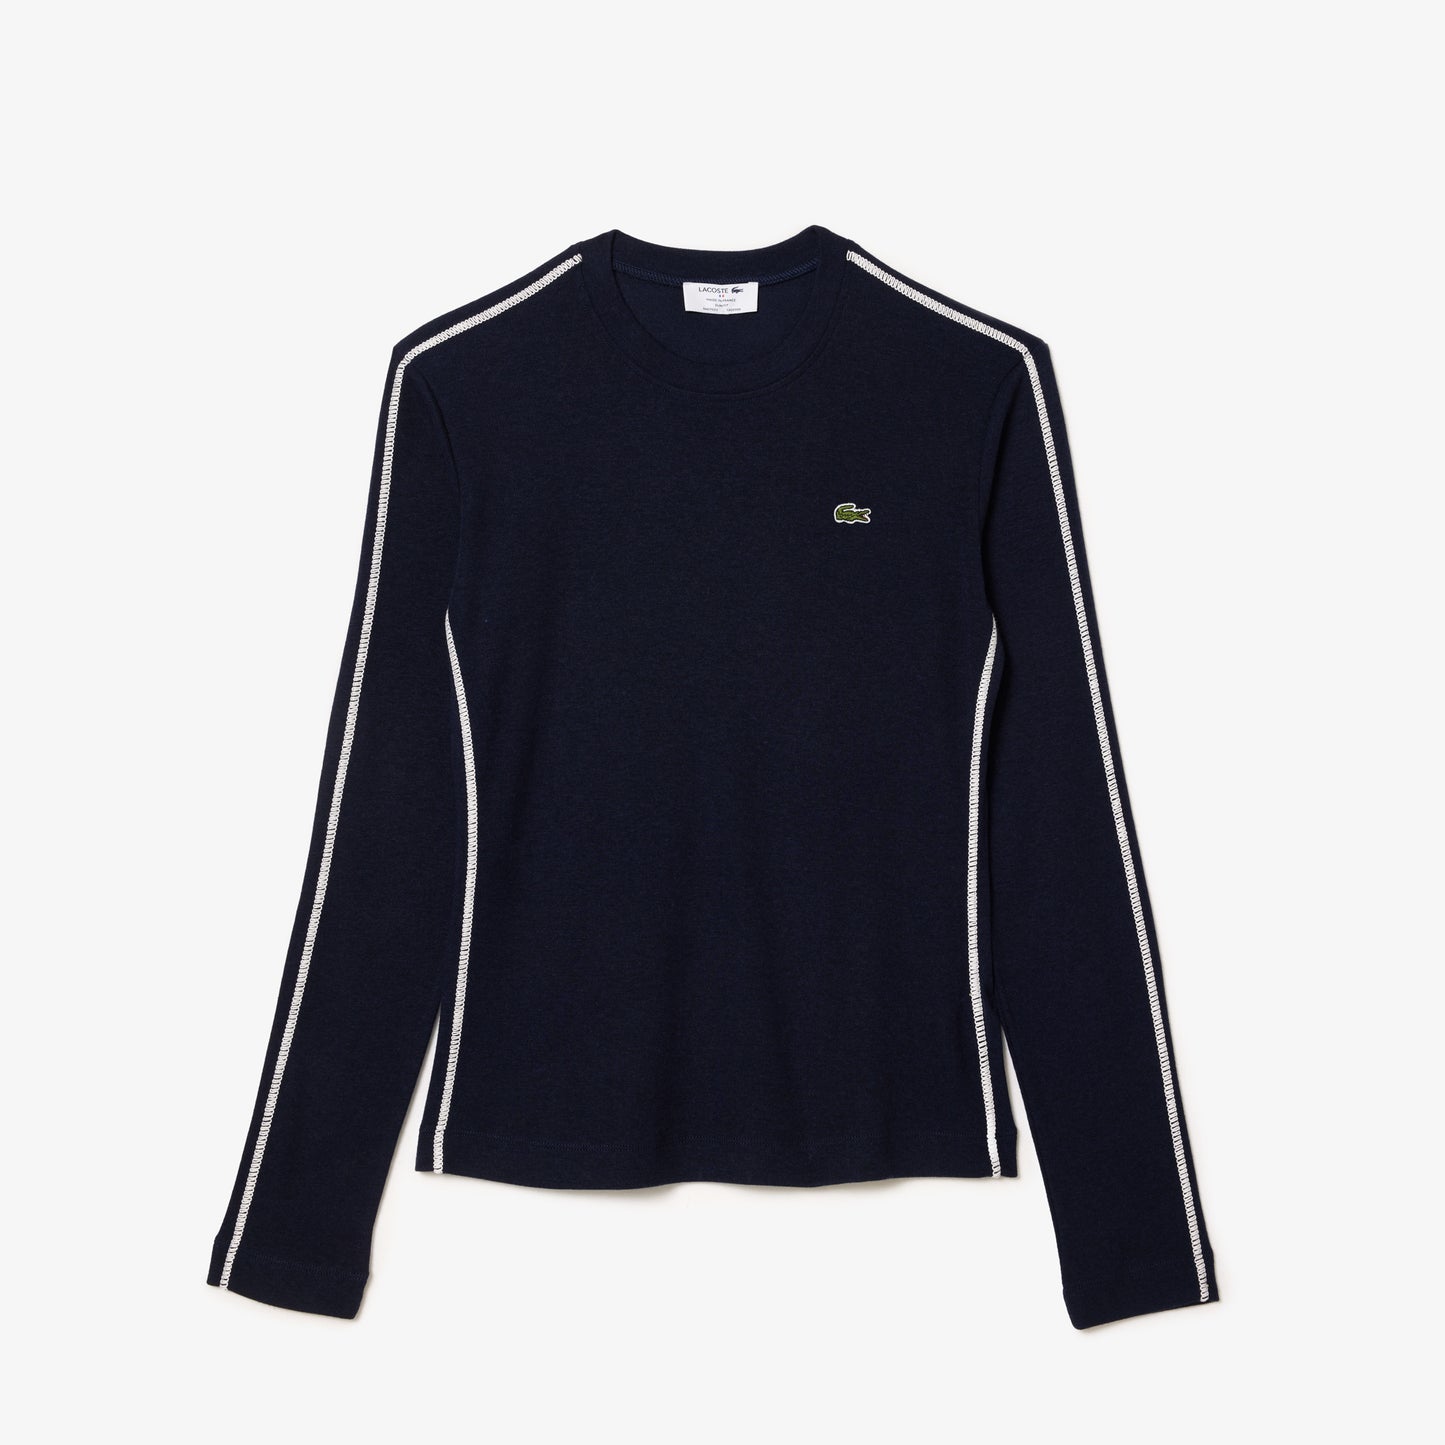 French Made Long Sleeved T-shirt